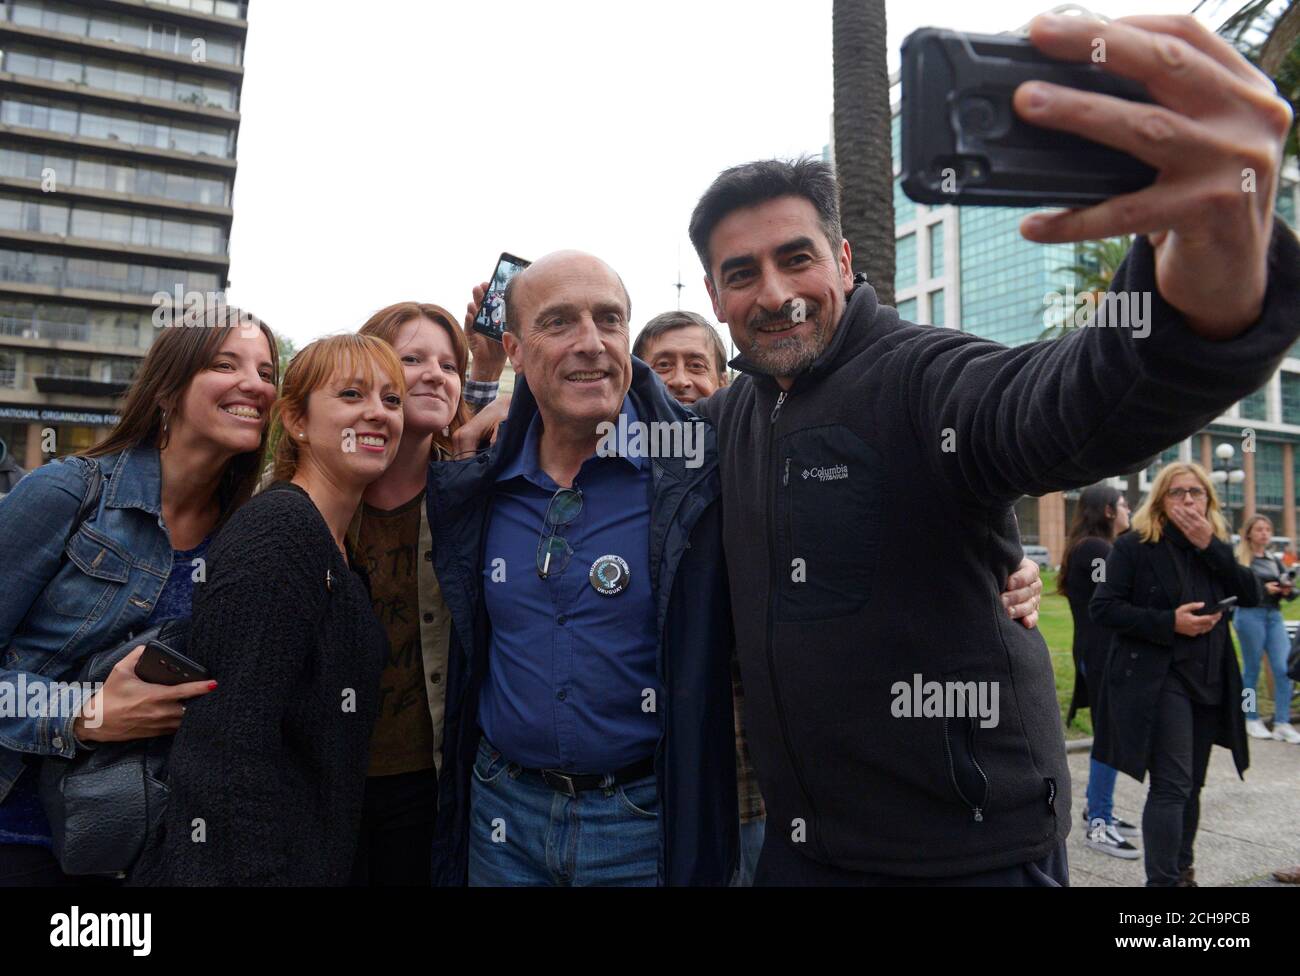 Daniel Martinez (C), presidential candidate of the ruling Broad Front party, poses for a photograph with supporters, during a protest against feticide and violence women, in Montevideo, Uruguay November 25, 2019. REUTERS/ Andres Cuenca Olaondo Stock Photo